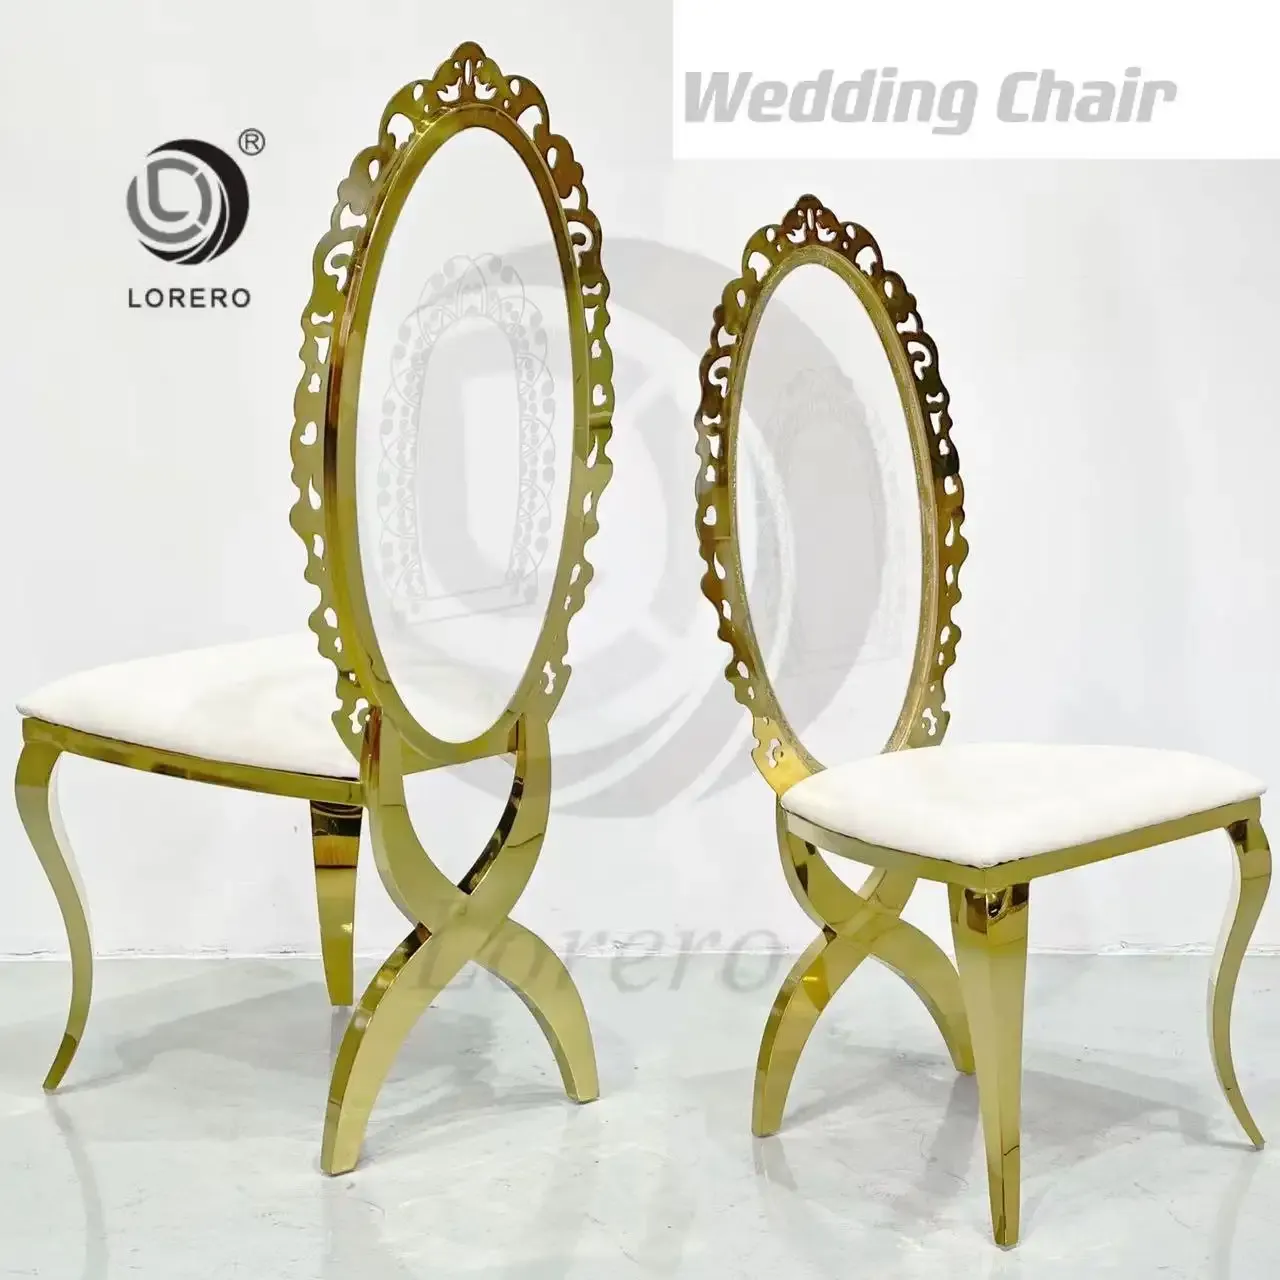 Table And Chair Decorations For Weddings